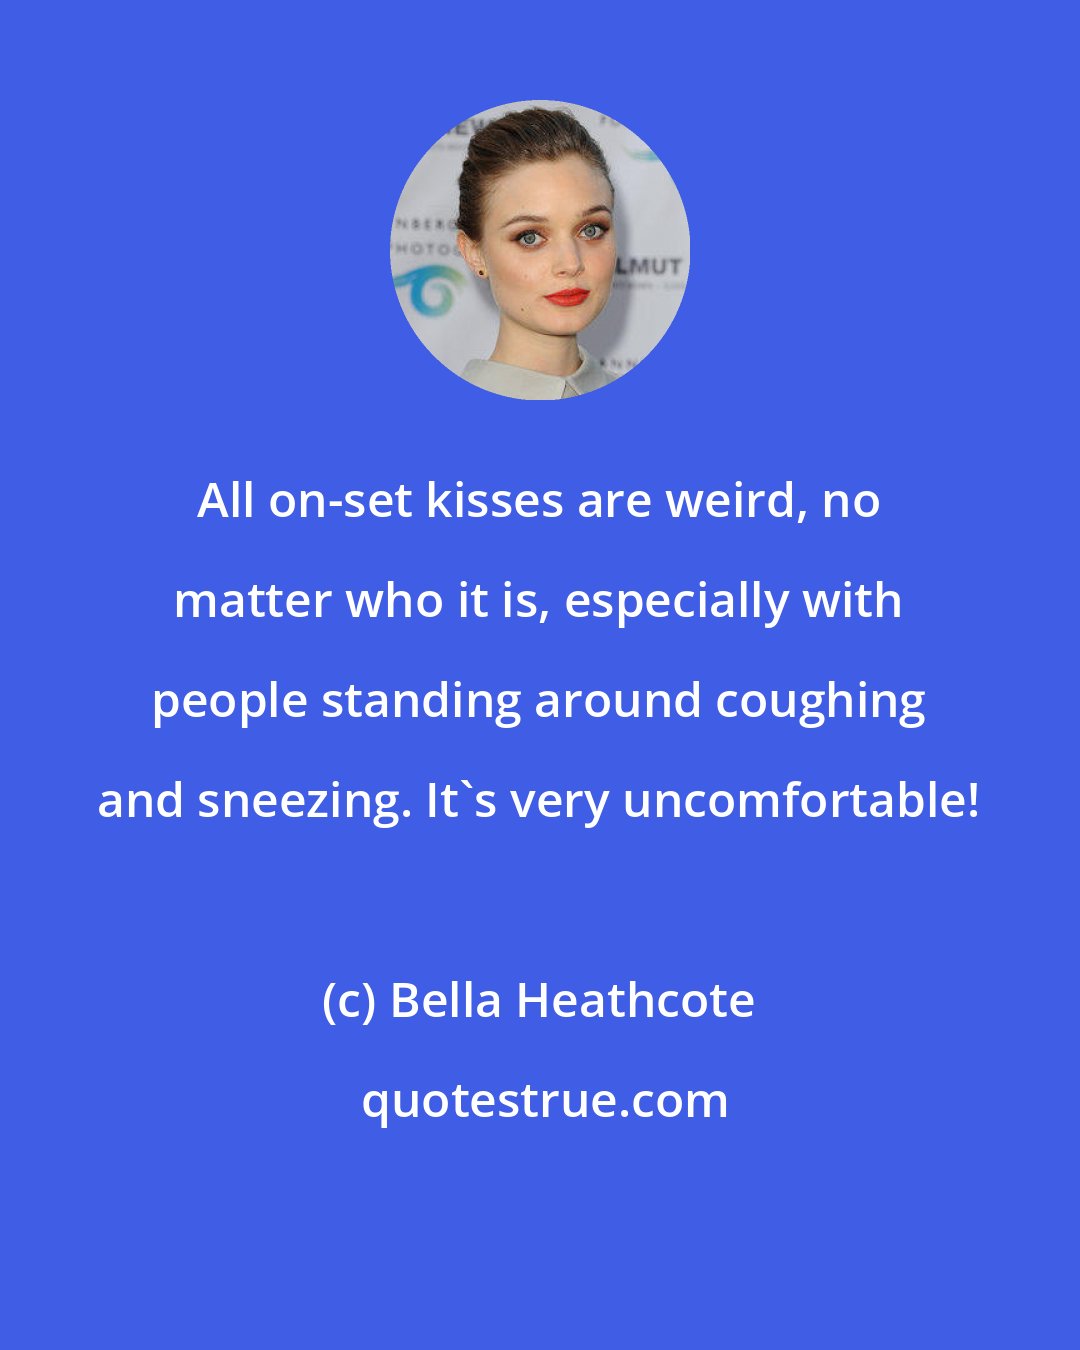 Bella Heathcote: All on-set kisses are weird, no matter who it is, especially with people standing around coughing and sneezing. It's very uncomfortable!